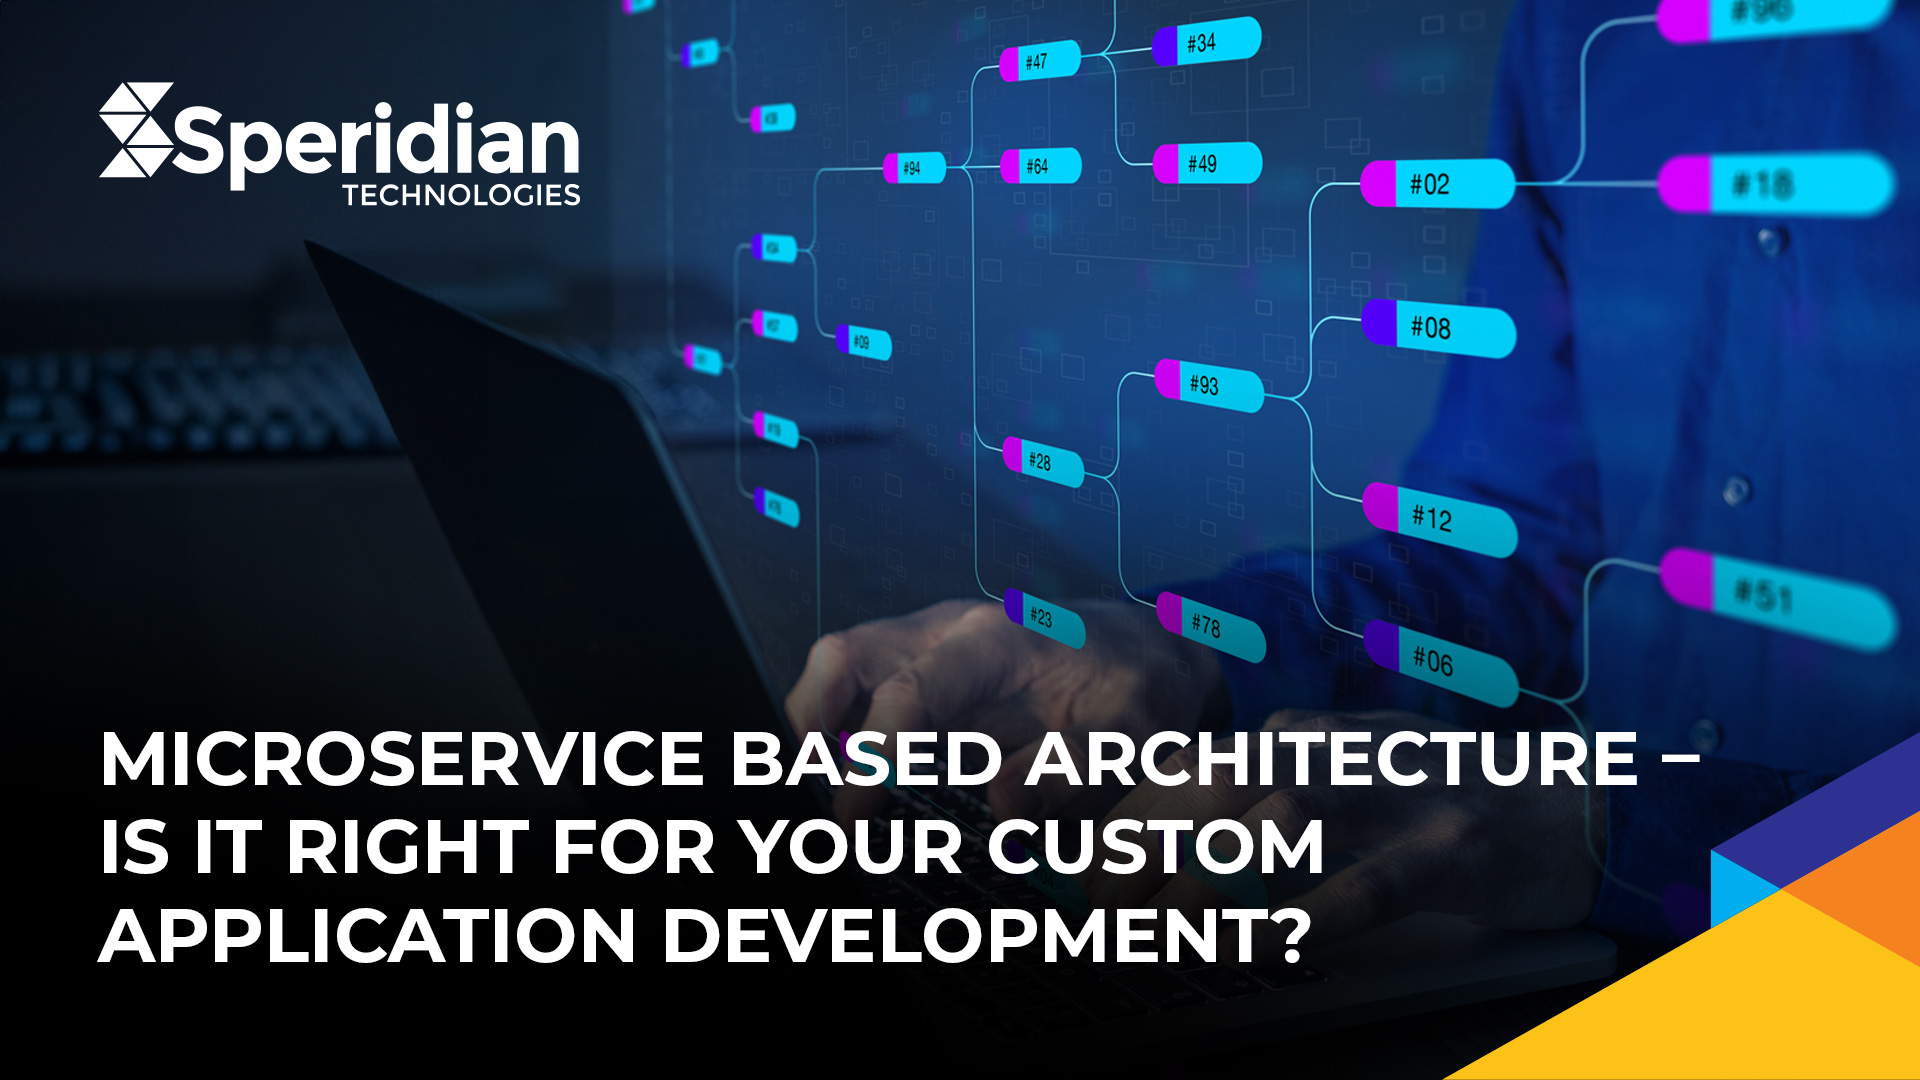 Microservice Based Architecture – Is It Right for Your Custom Application Development?